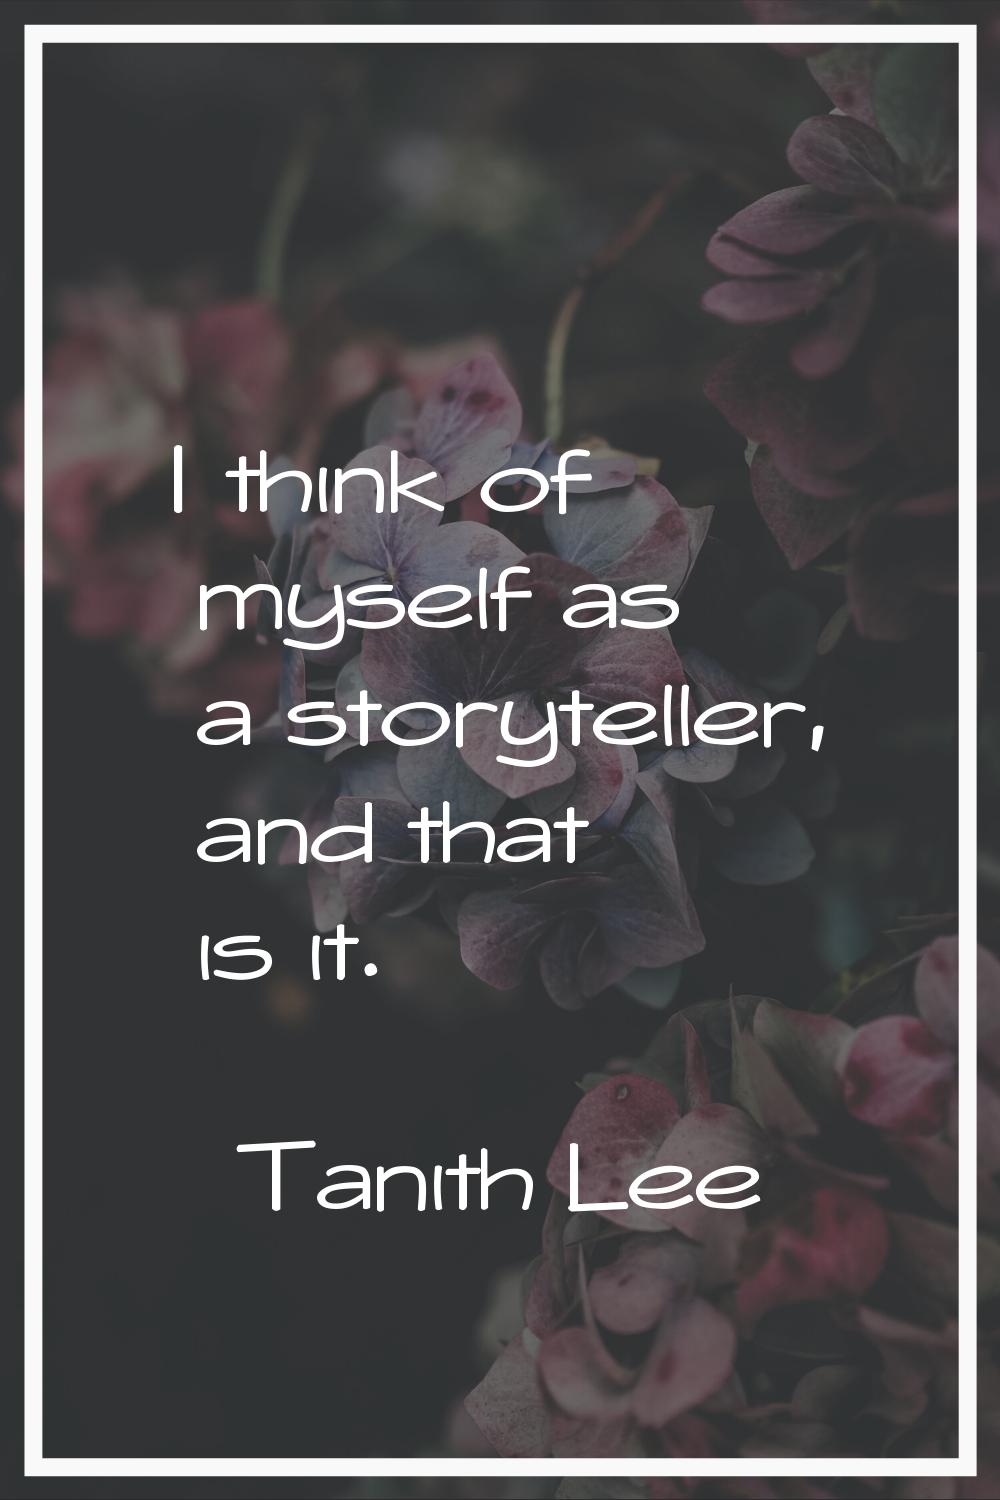 I think of myself as a storyteller, and that is it.